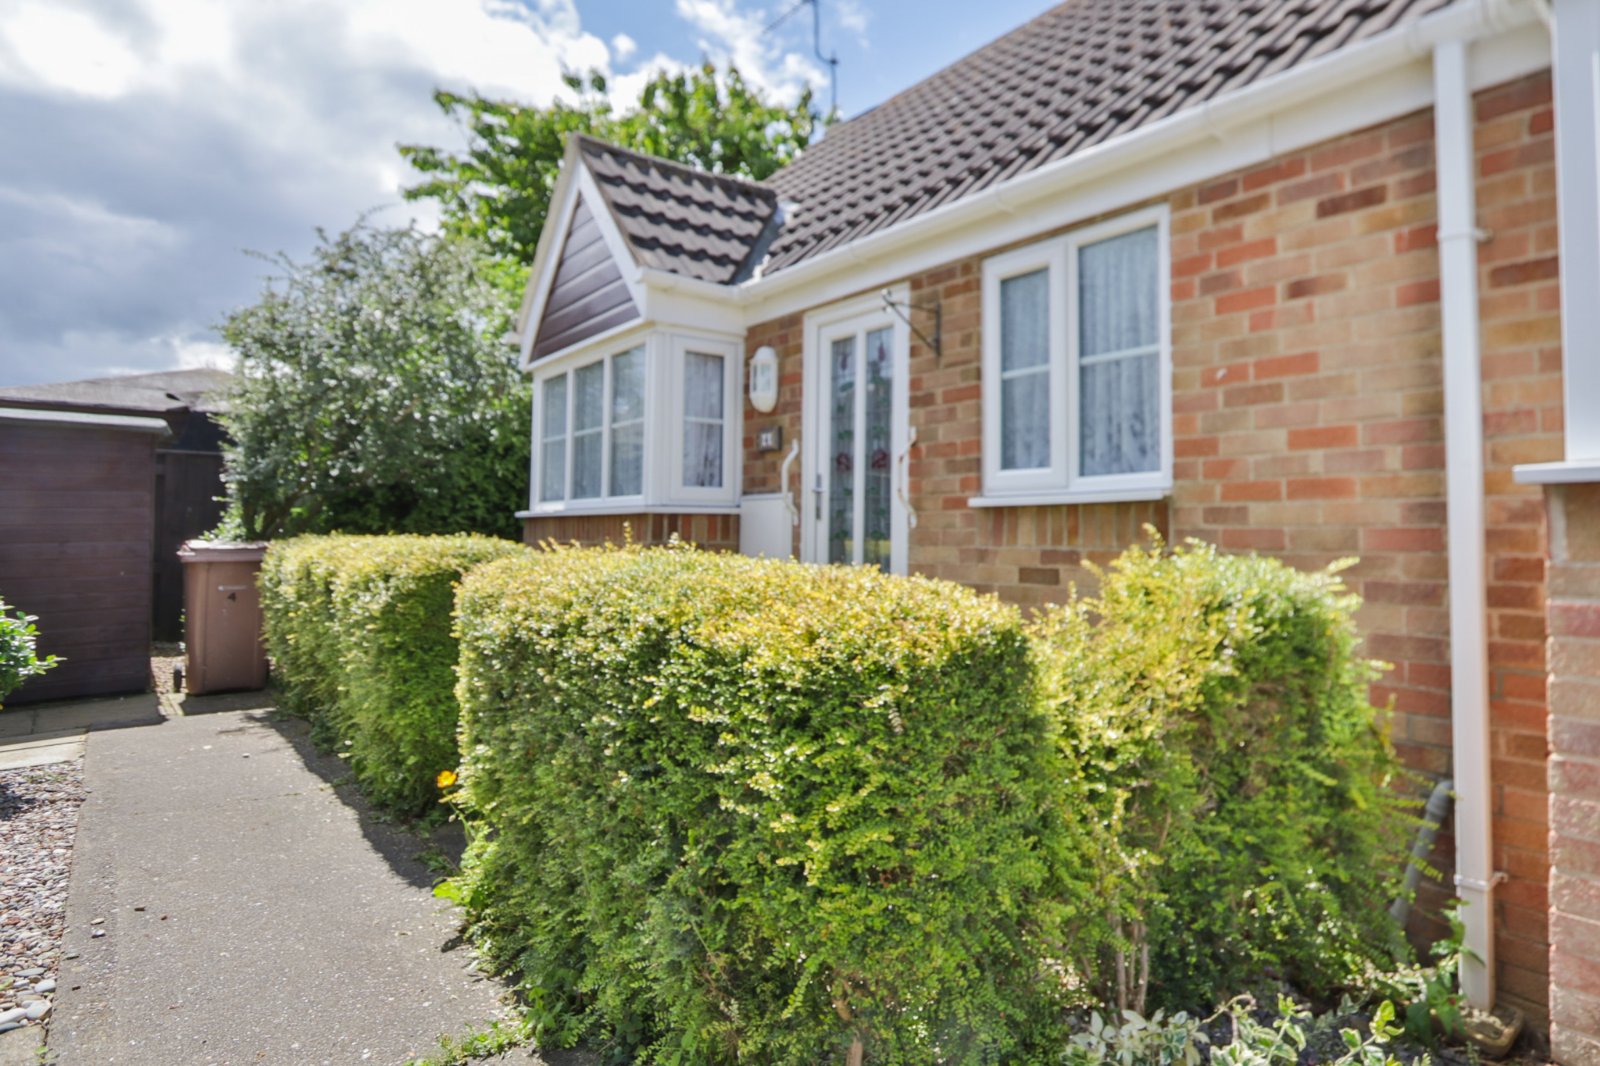 1 bed bungalow for sale in Church Lane, Thorngumbald, HU12